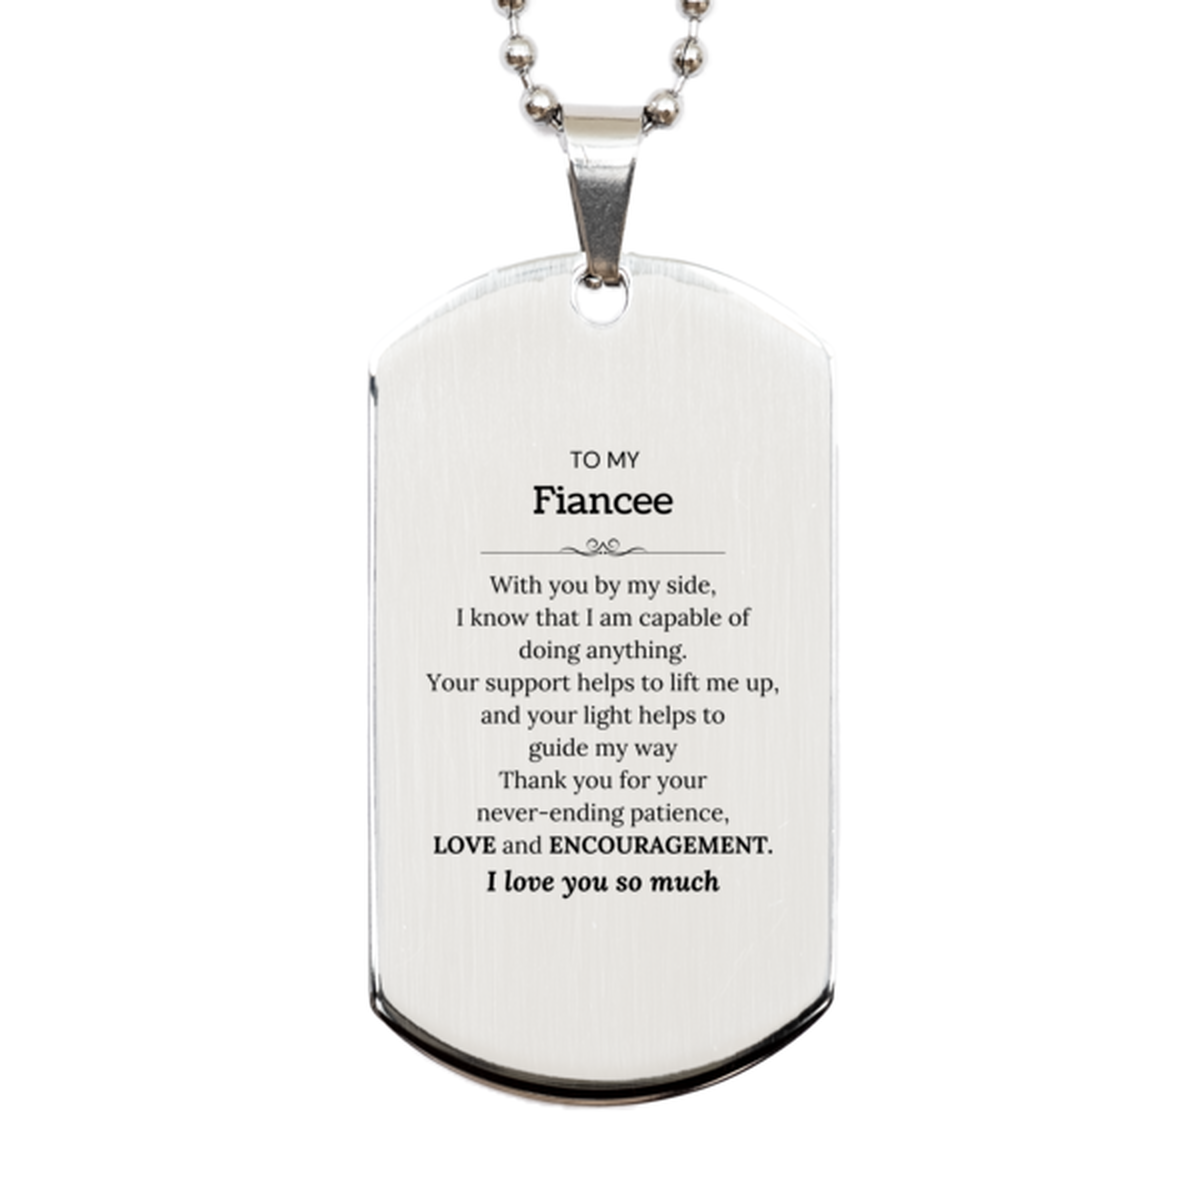 Appreciation Fiancee Silver Dog Tag Gifts, To My Fiancee Birthday Christmas Wedding Keepsake Gifts for Fiancee With you by my side, I know that I am capable of doing anything. I love you so much